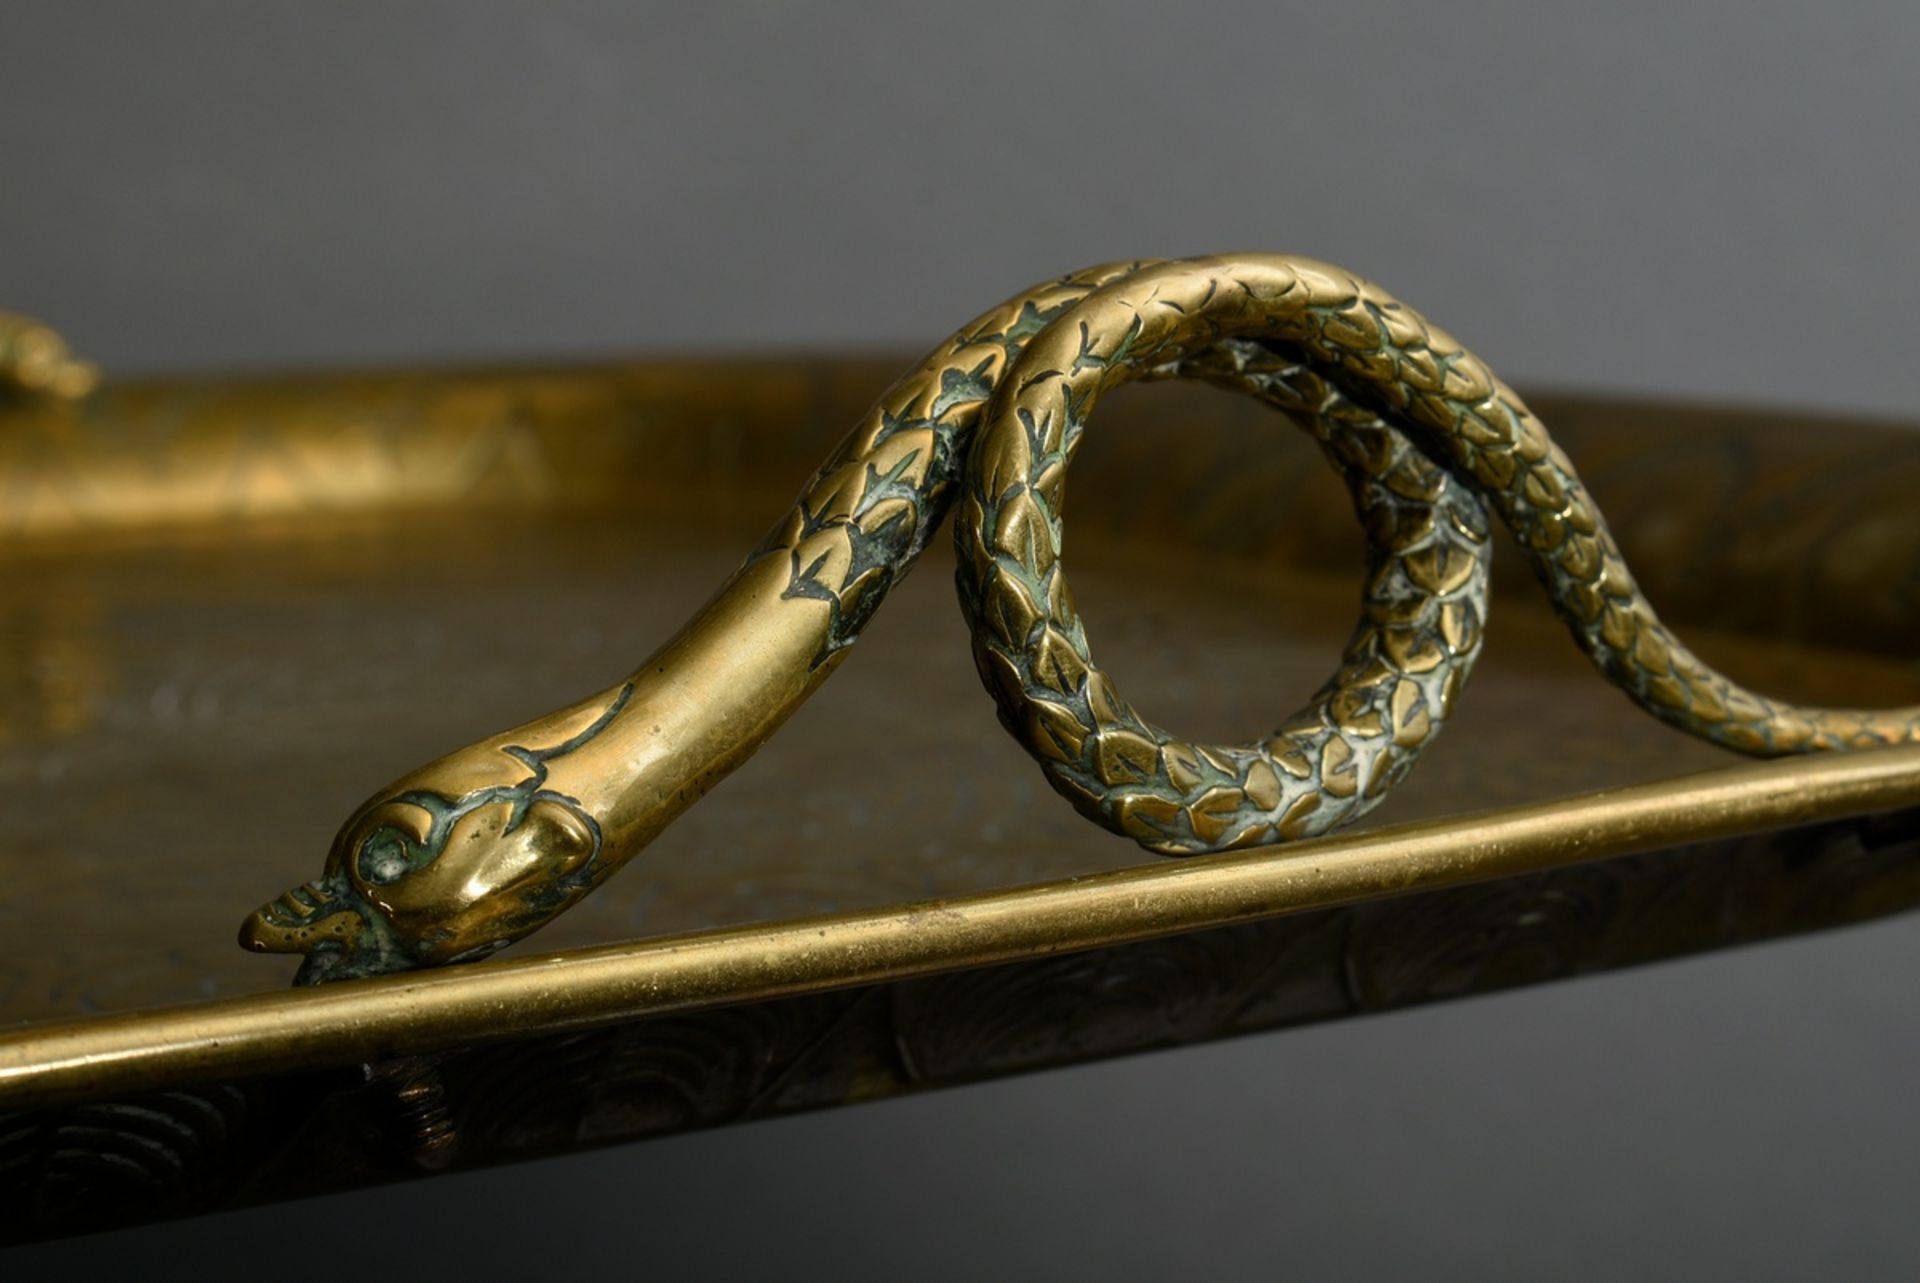 Rectangular brass tray with floral engraving and sculpted snake handles, 19th century, 56x45cm - Image 4 of 6